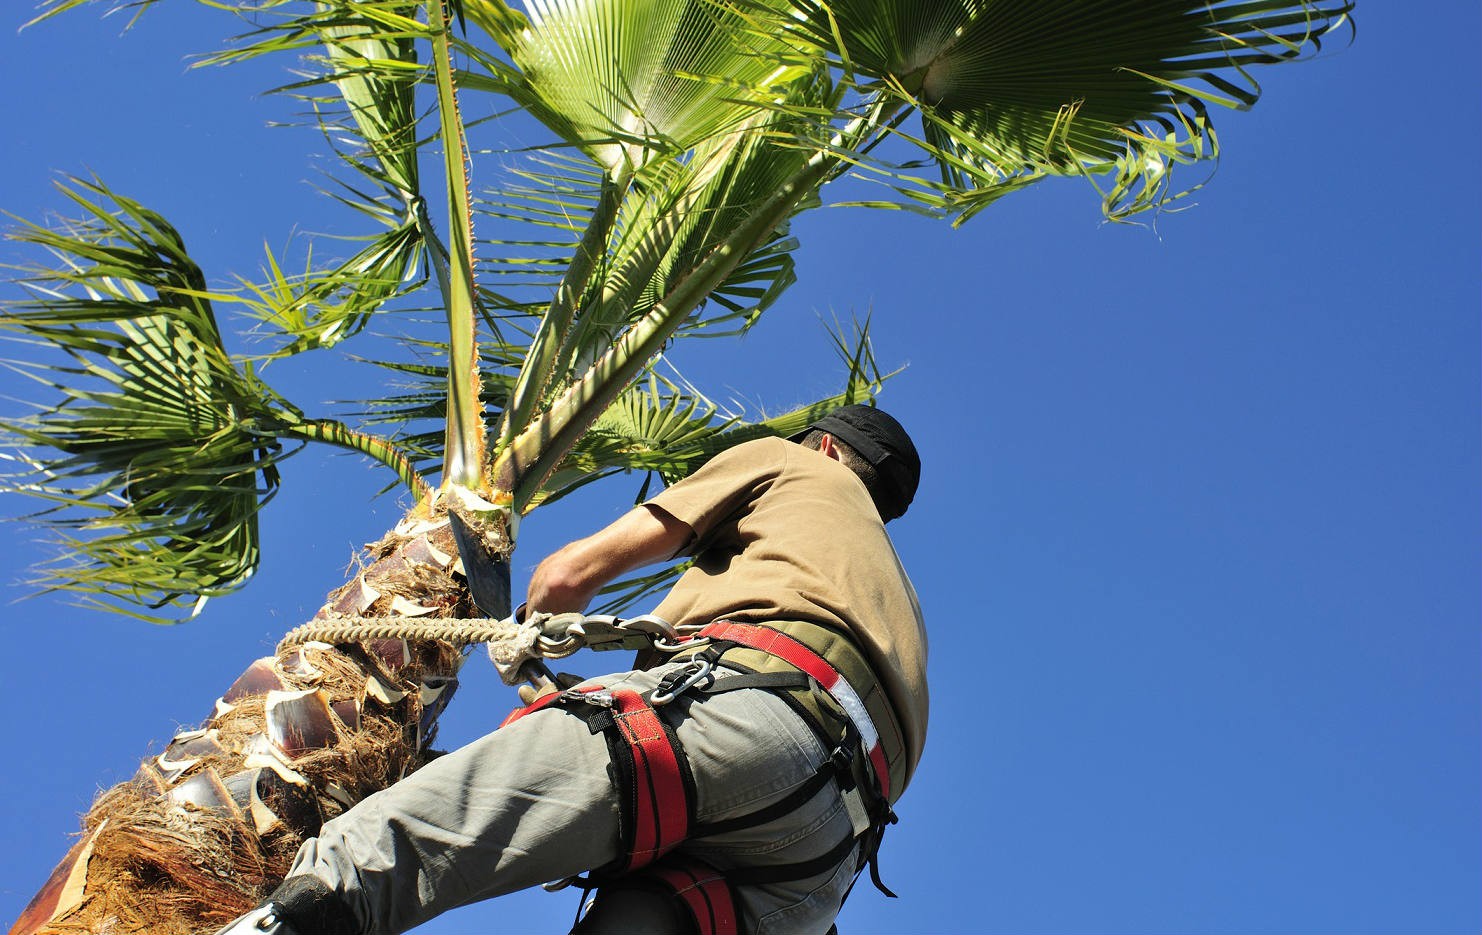 Palm Tree Trimming Near Me-Palm Beach County Tree Trimming and Tree Removal Services-We Offer Tree Trimming Services, Tree Removal, Tree Pruning, Tree Cutting, Residential and Commercial Tree Trimming Services, Storm Damage, Emergency Tree Removal, Land Clearing, Tree Companies, Tree Care Service, Stump Grinding, and we're the Best Tree Trimming Company Near You Guaranteed!